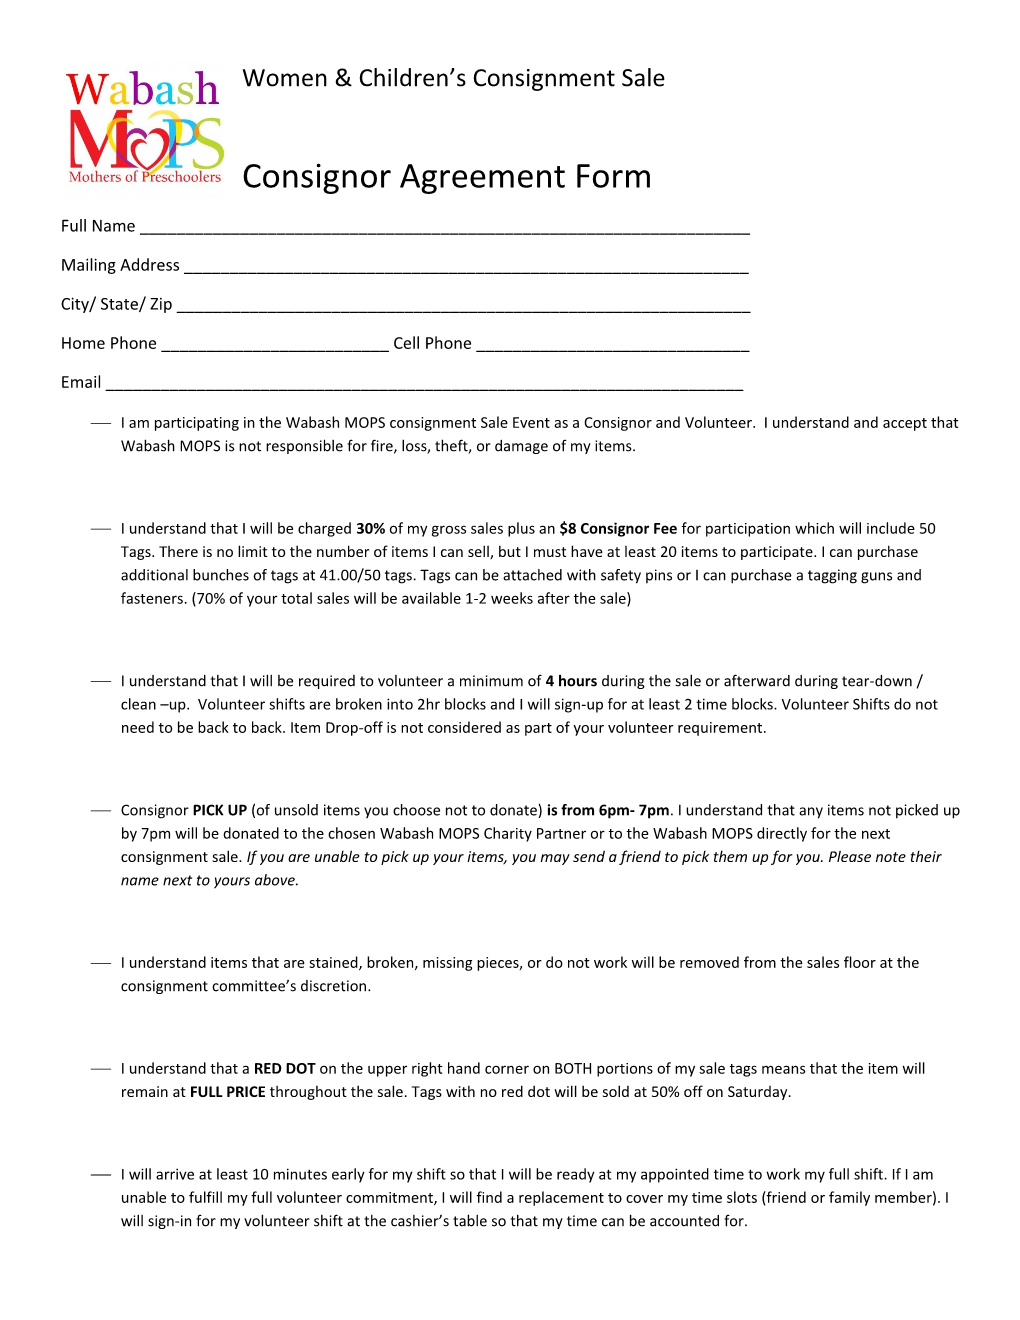 Consignor Agreement Form